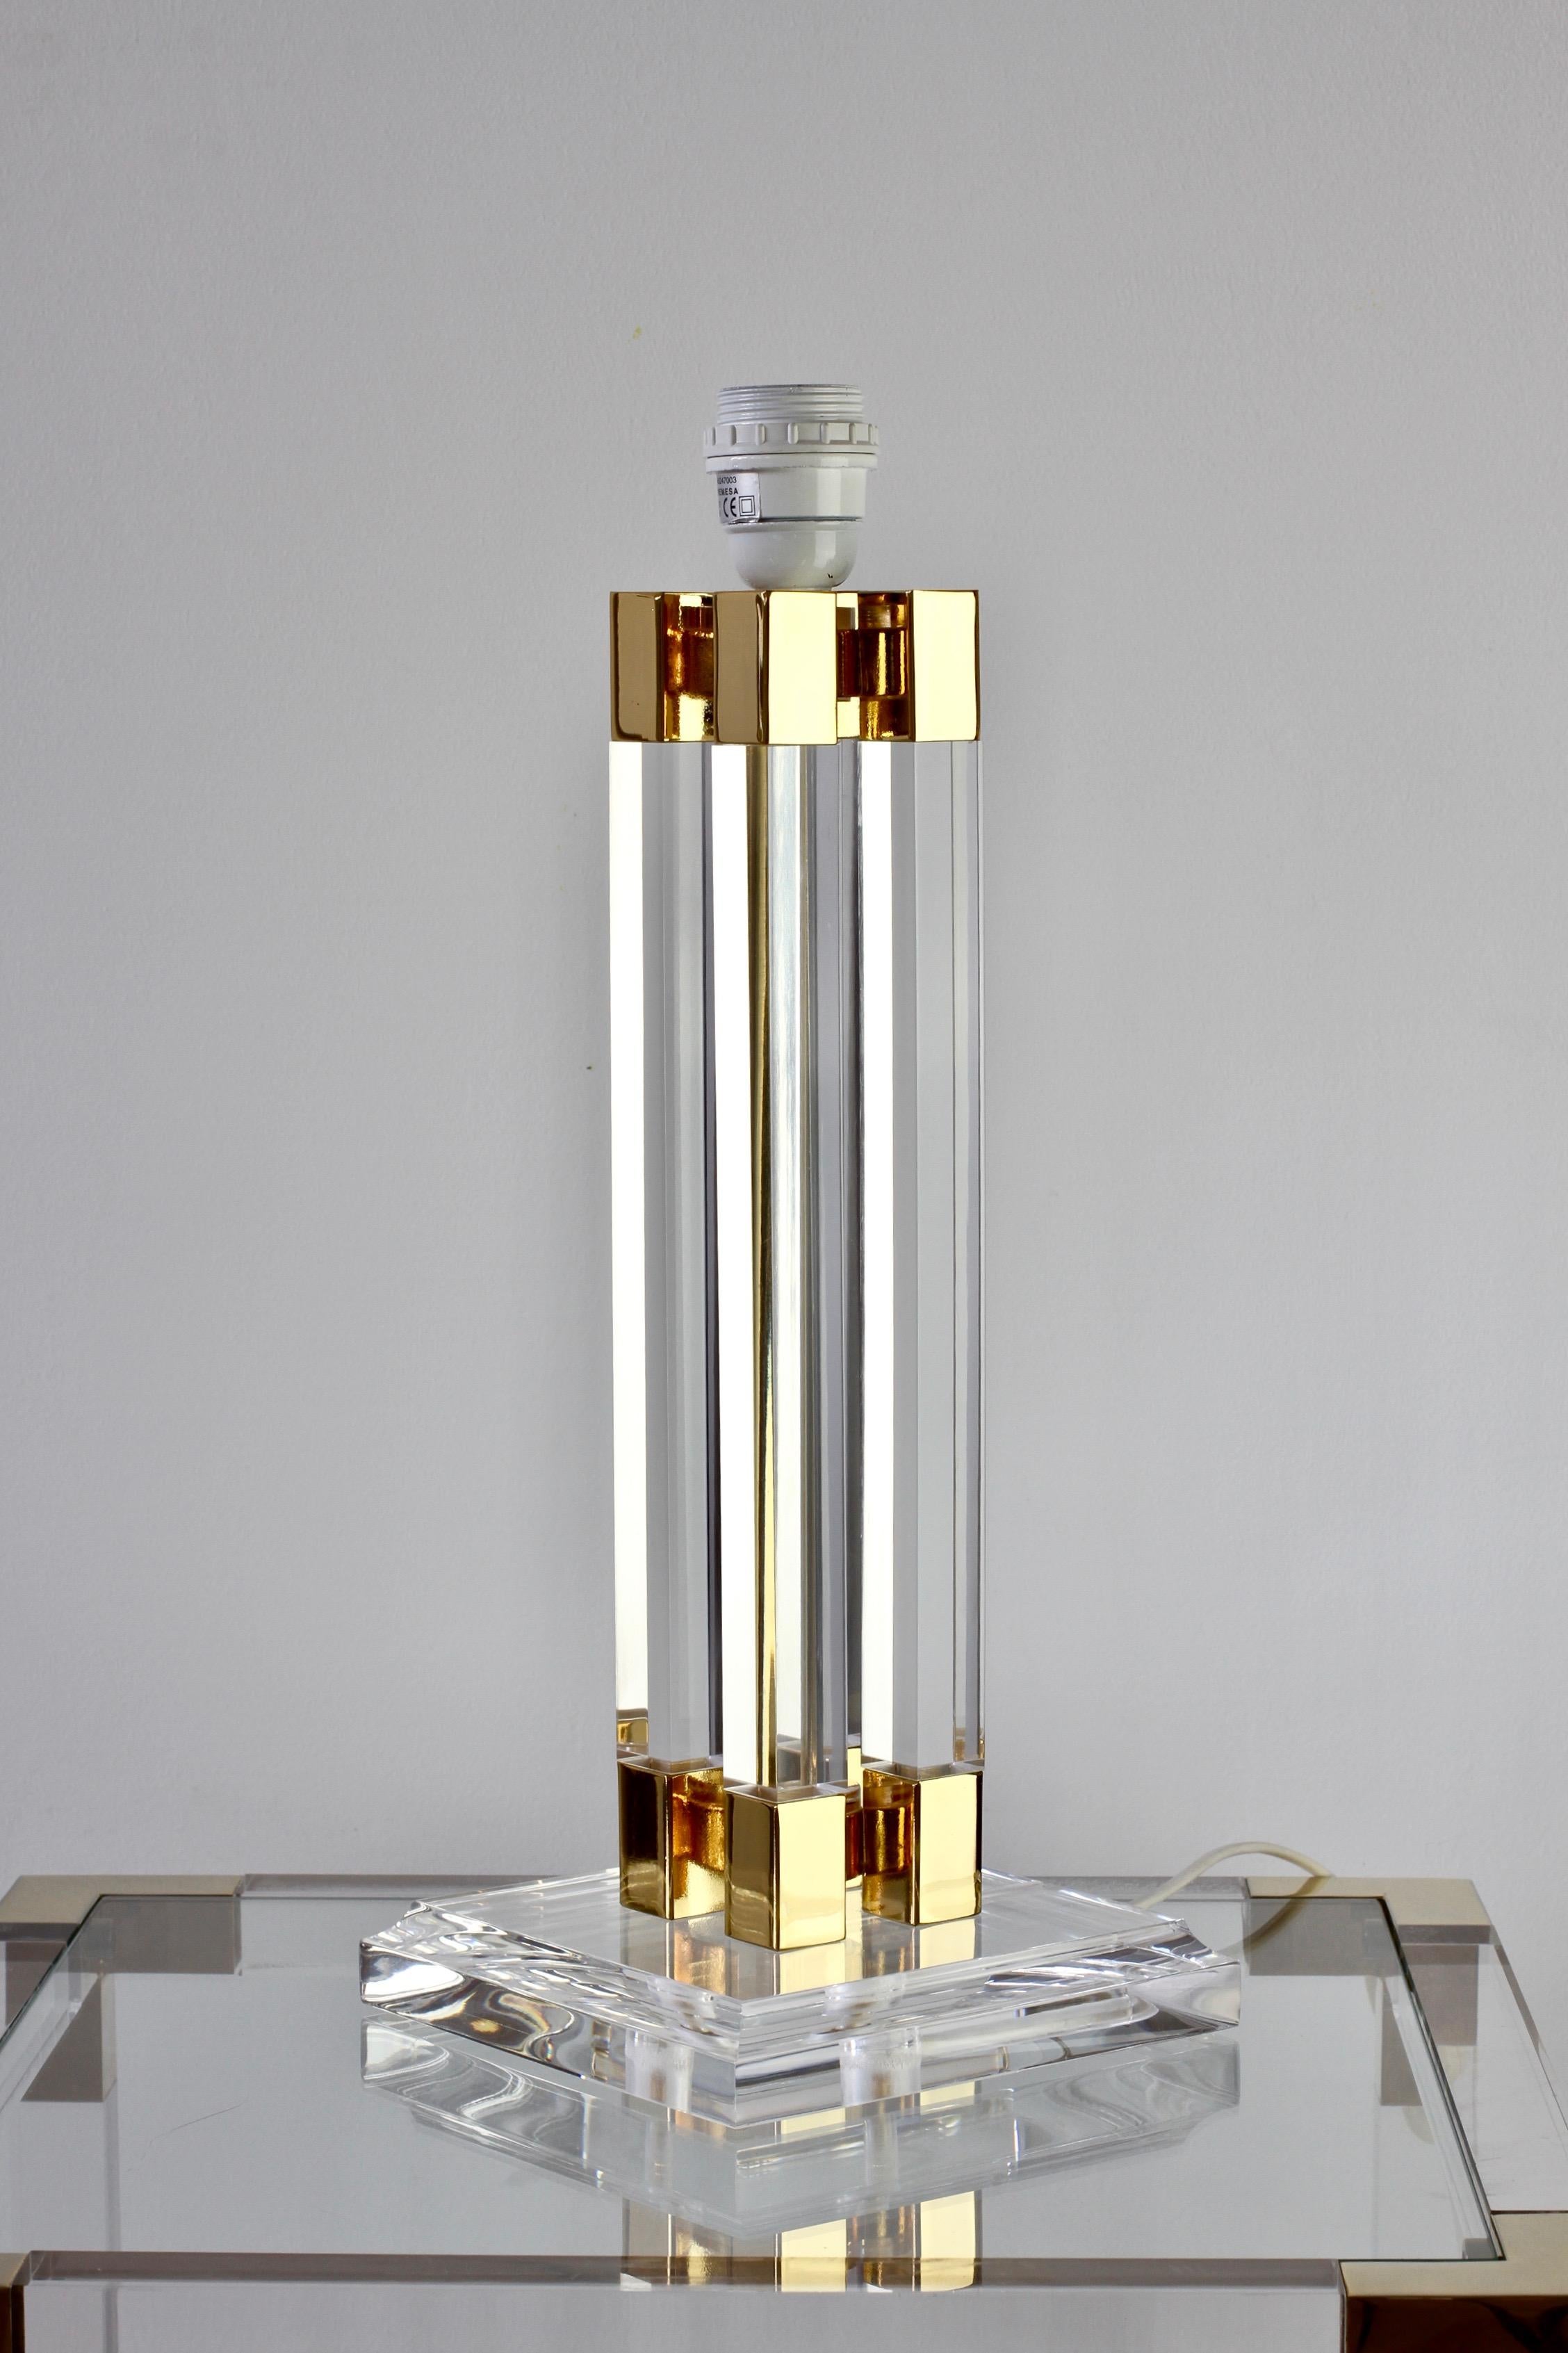 Charles Hollis Jones style square table lamp made of Lucite / acrylic with gilt (gold plated) brass details. Made by Spanish lighting company Sobremesa circa 1980. Featuring a clear lucite square base with four columns / pillars with gold coloured